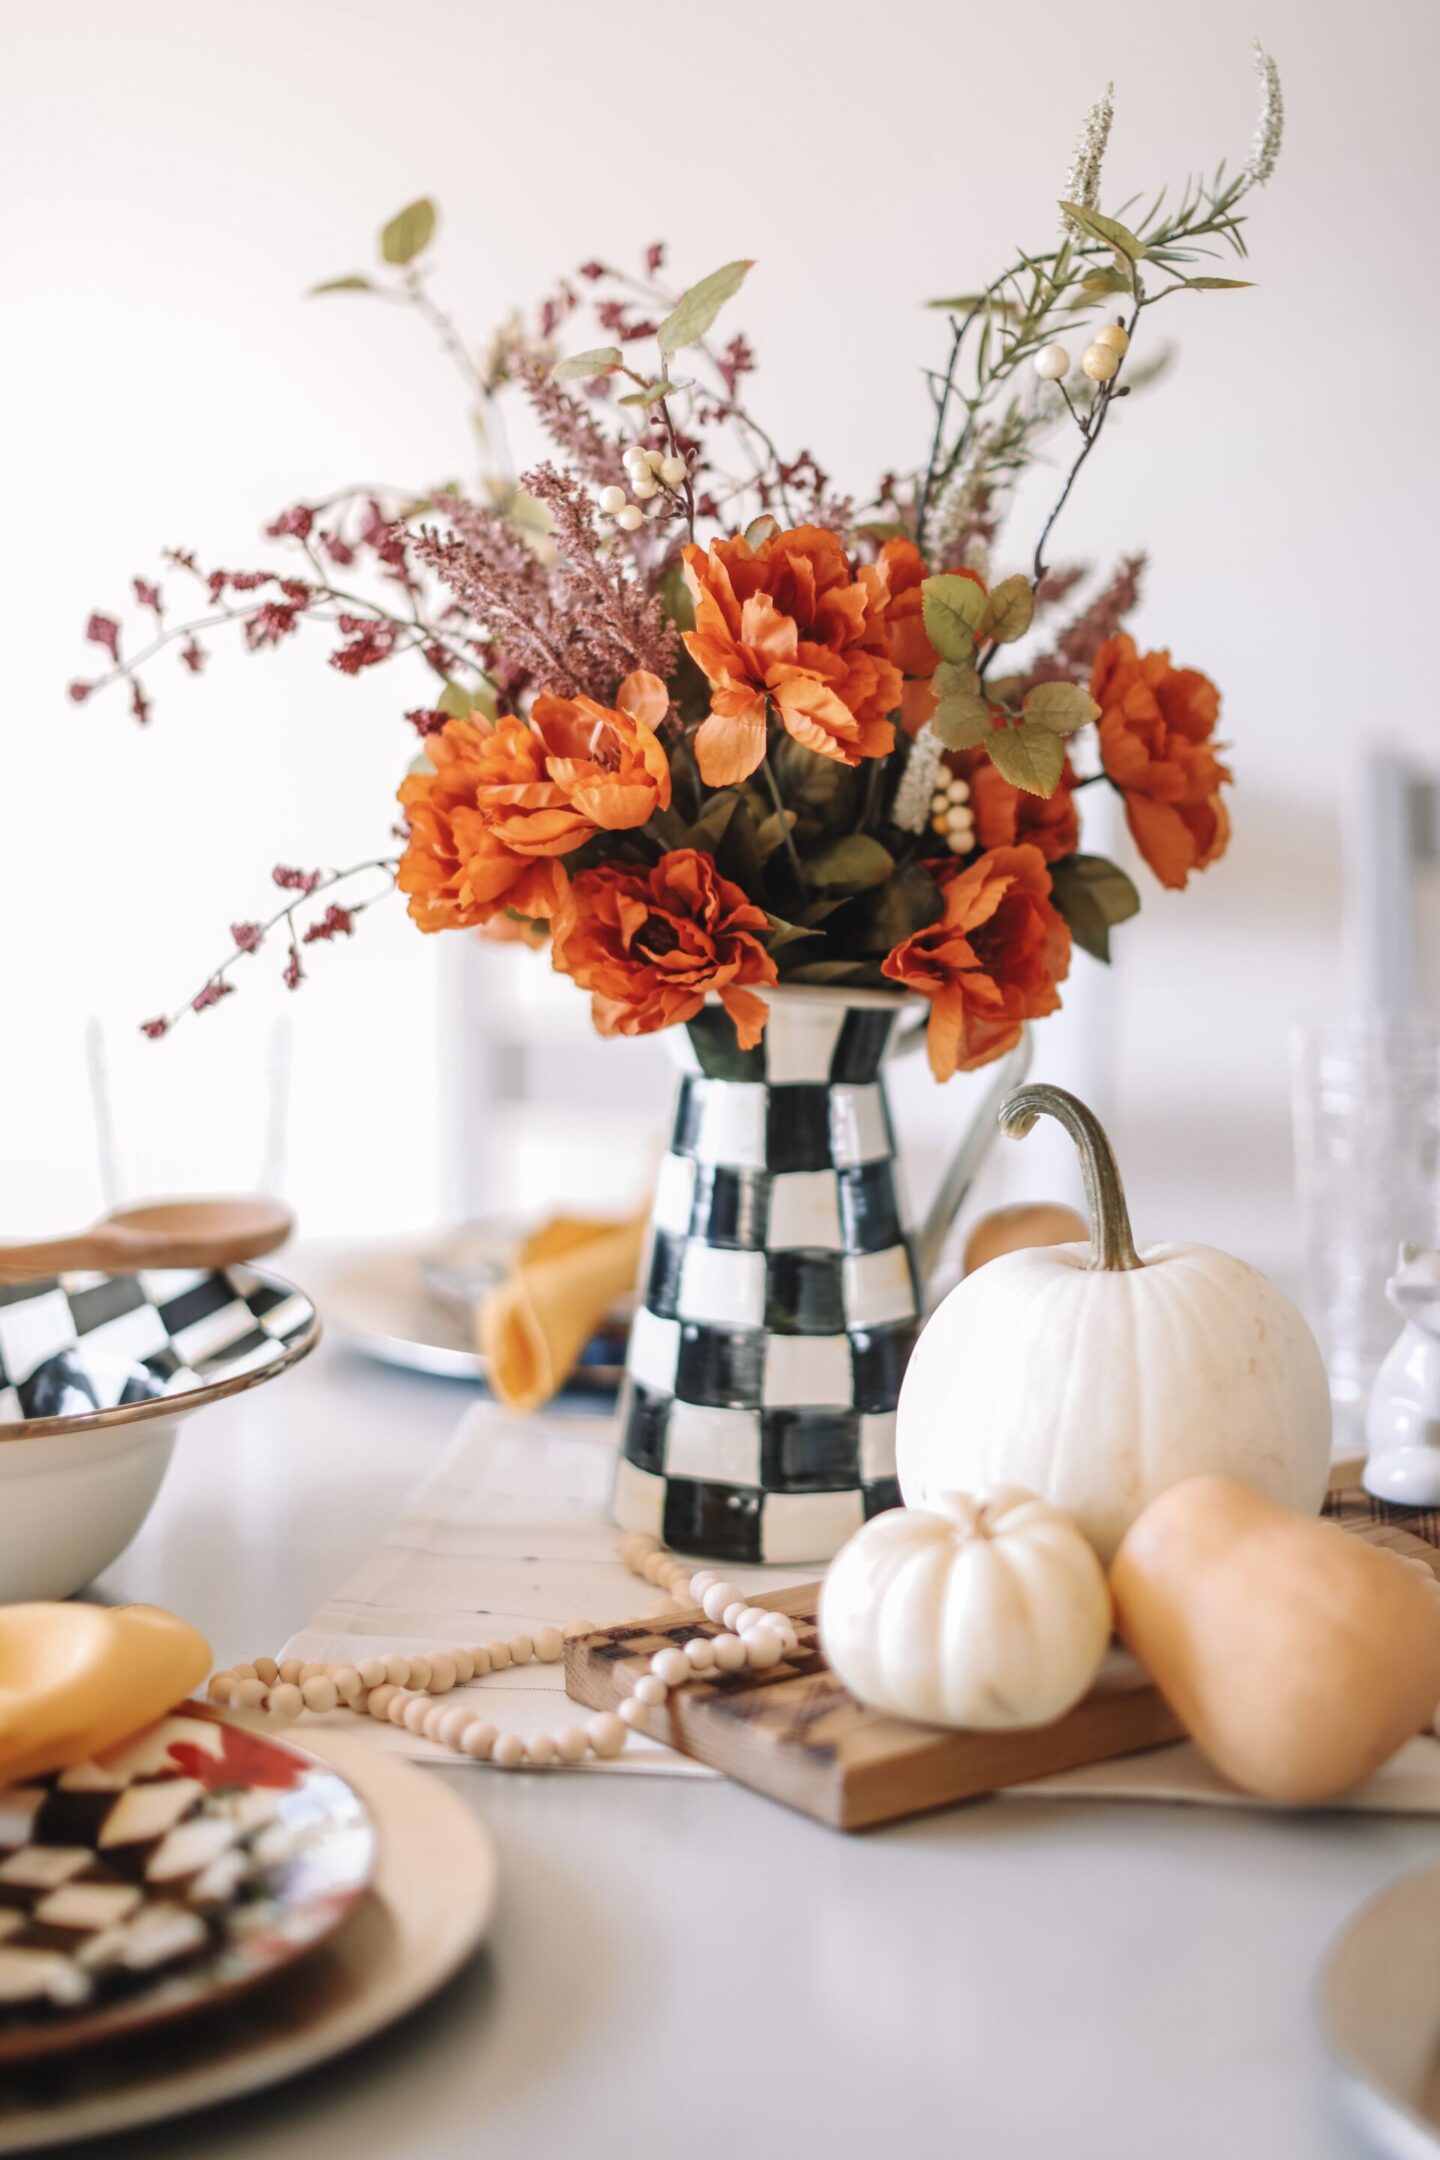 TIPS FOR DECORATING A STUNNING FALL TABLESCAPE WITH MACKENZIE-CHILDS